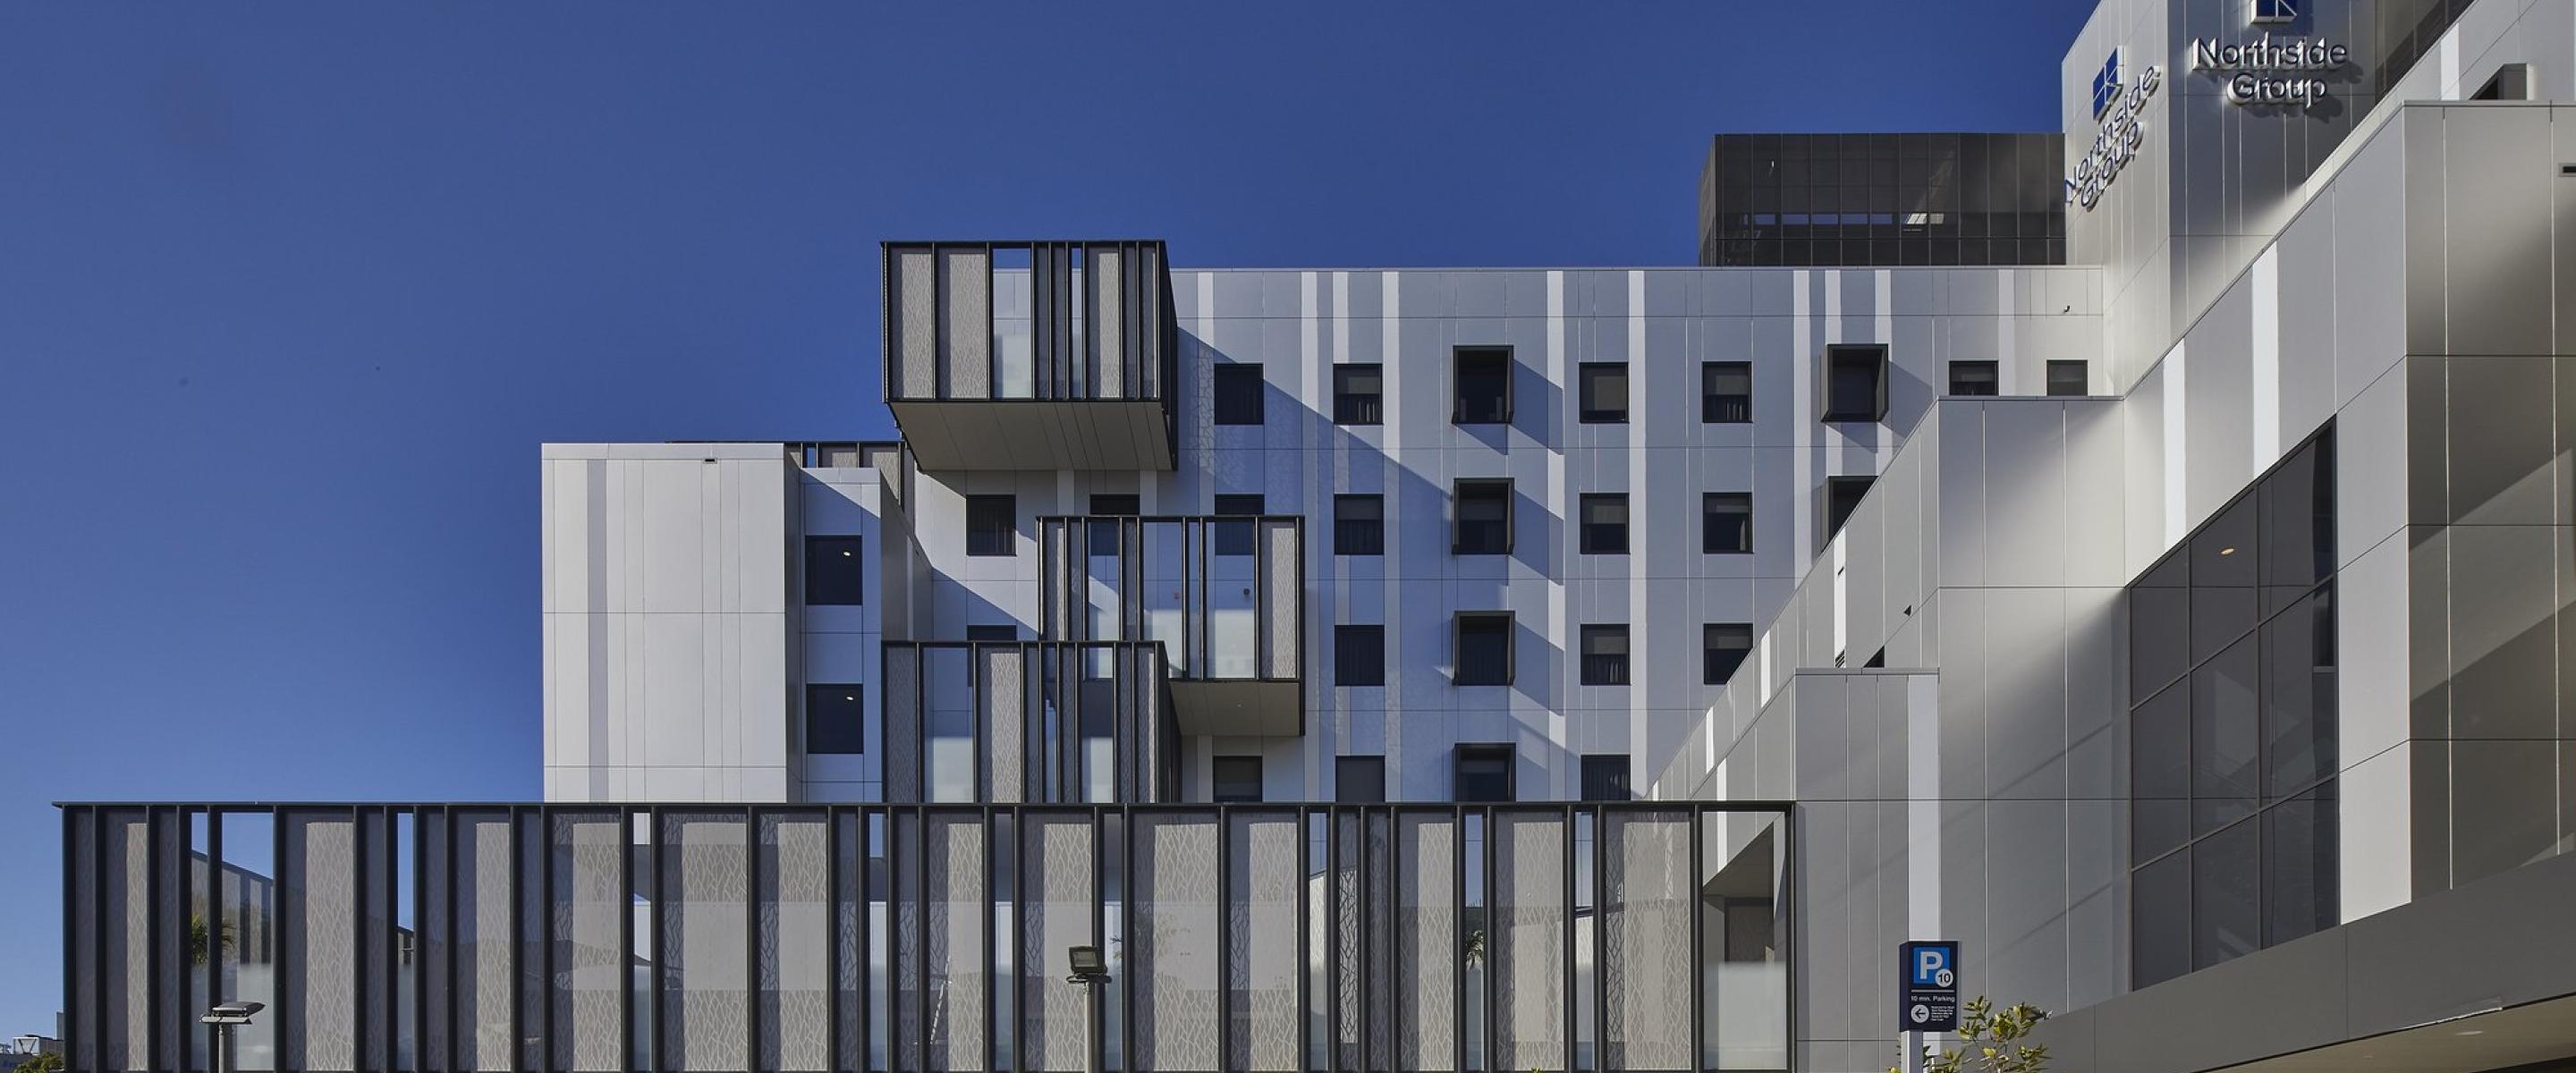 Ramsay Clinic Northside - TRUECORE® steel -  the cladding system was installed to create the watertight façade